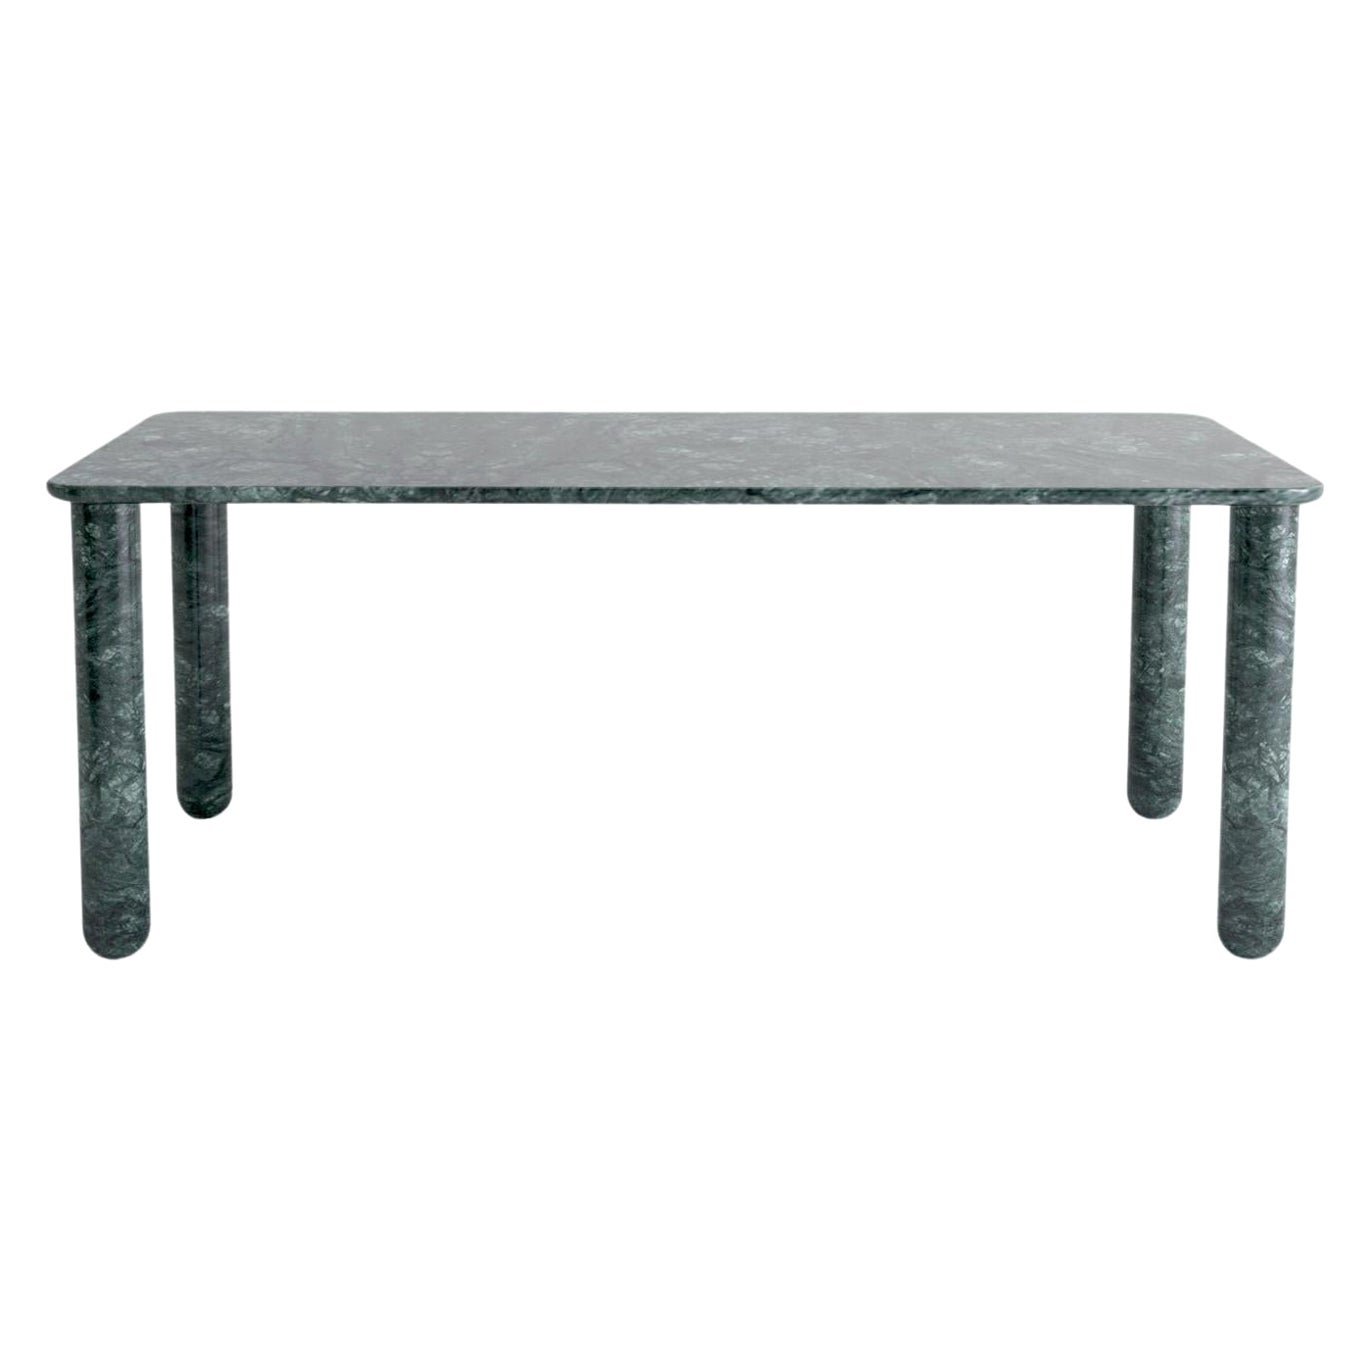 Xlarge Green Marble "Sunday" Dining Table, Jean-Baptiste Souletie For Sale